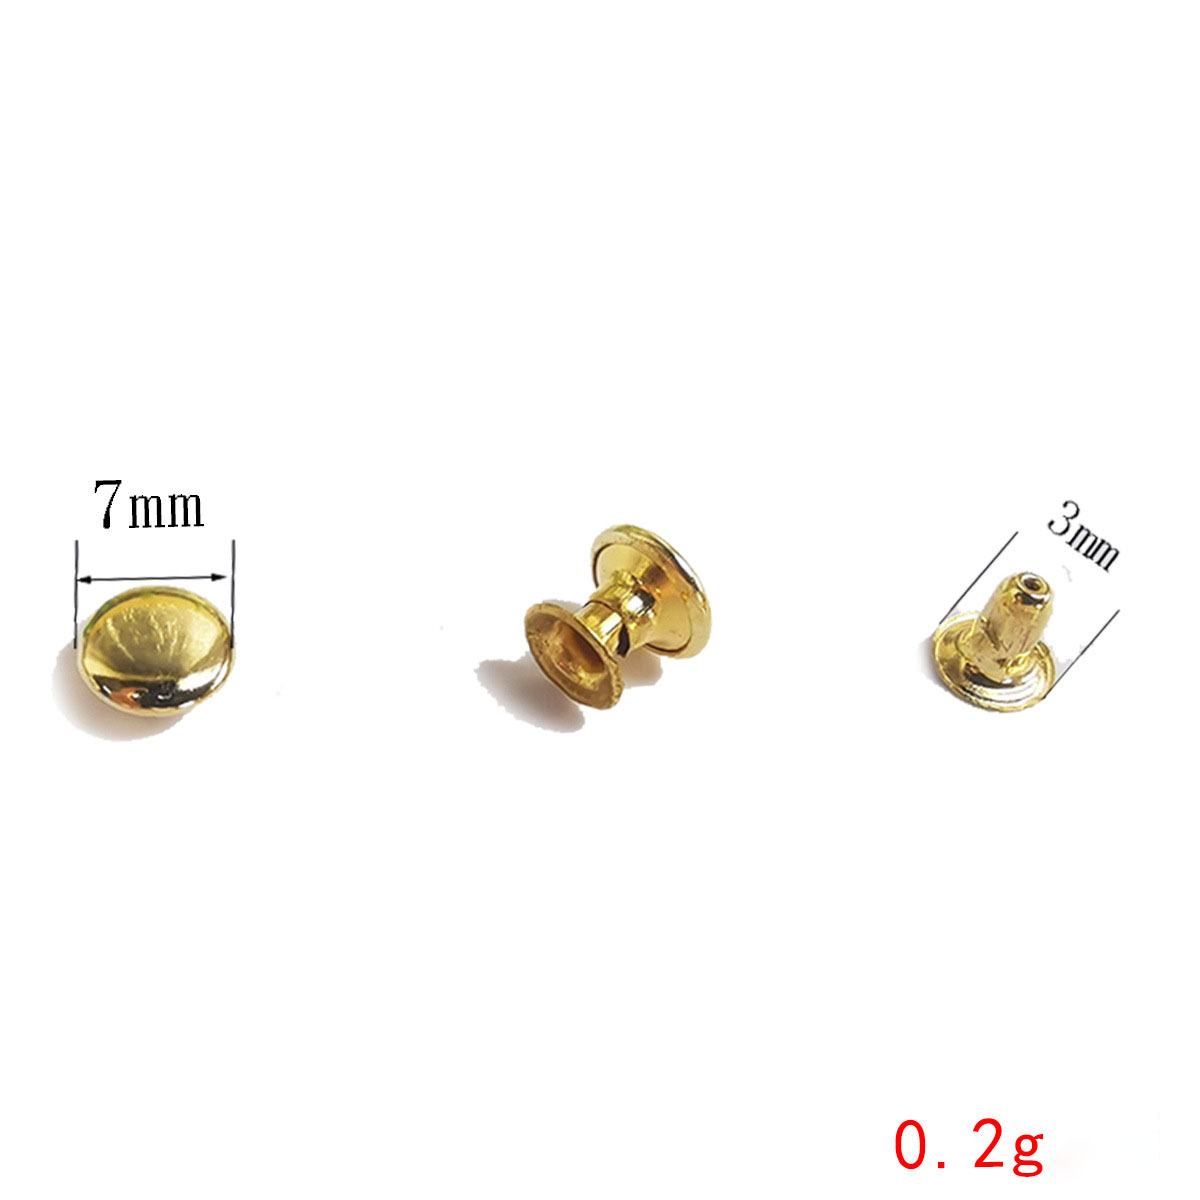 7mm gold